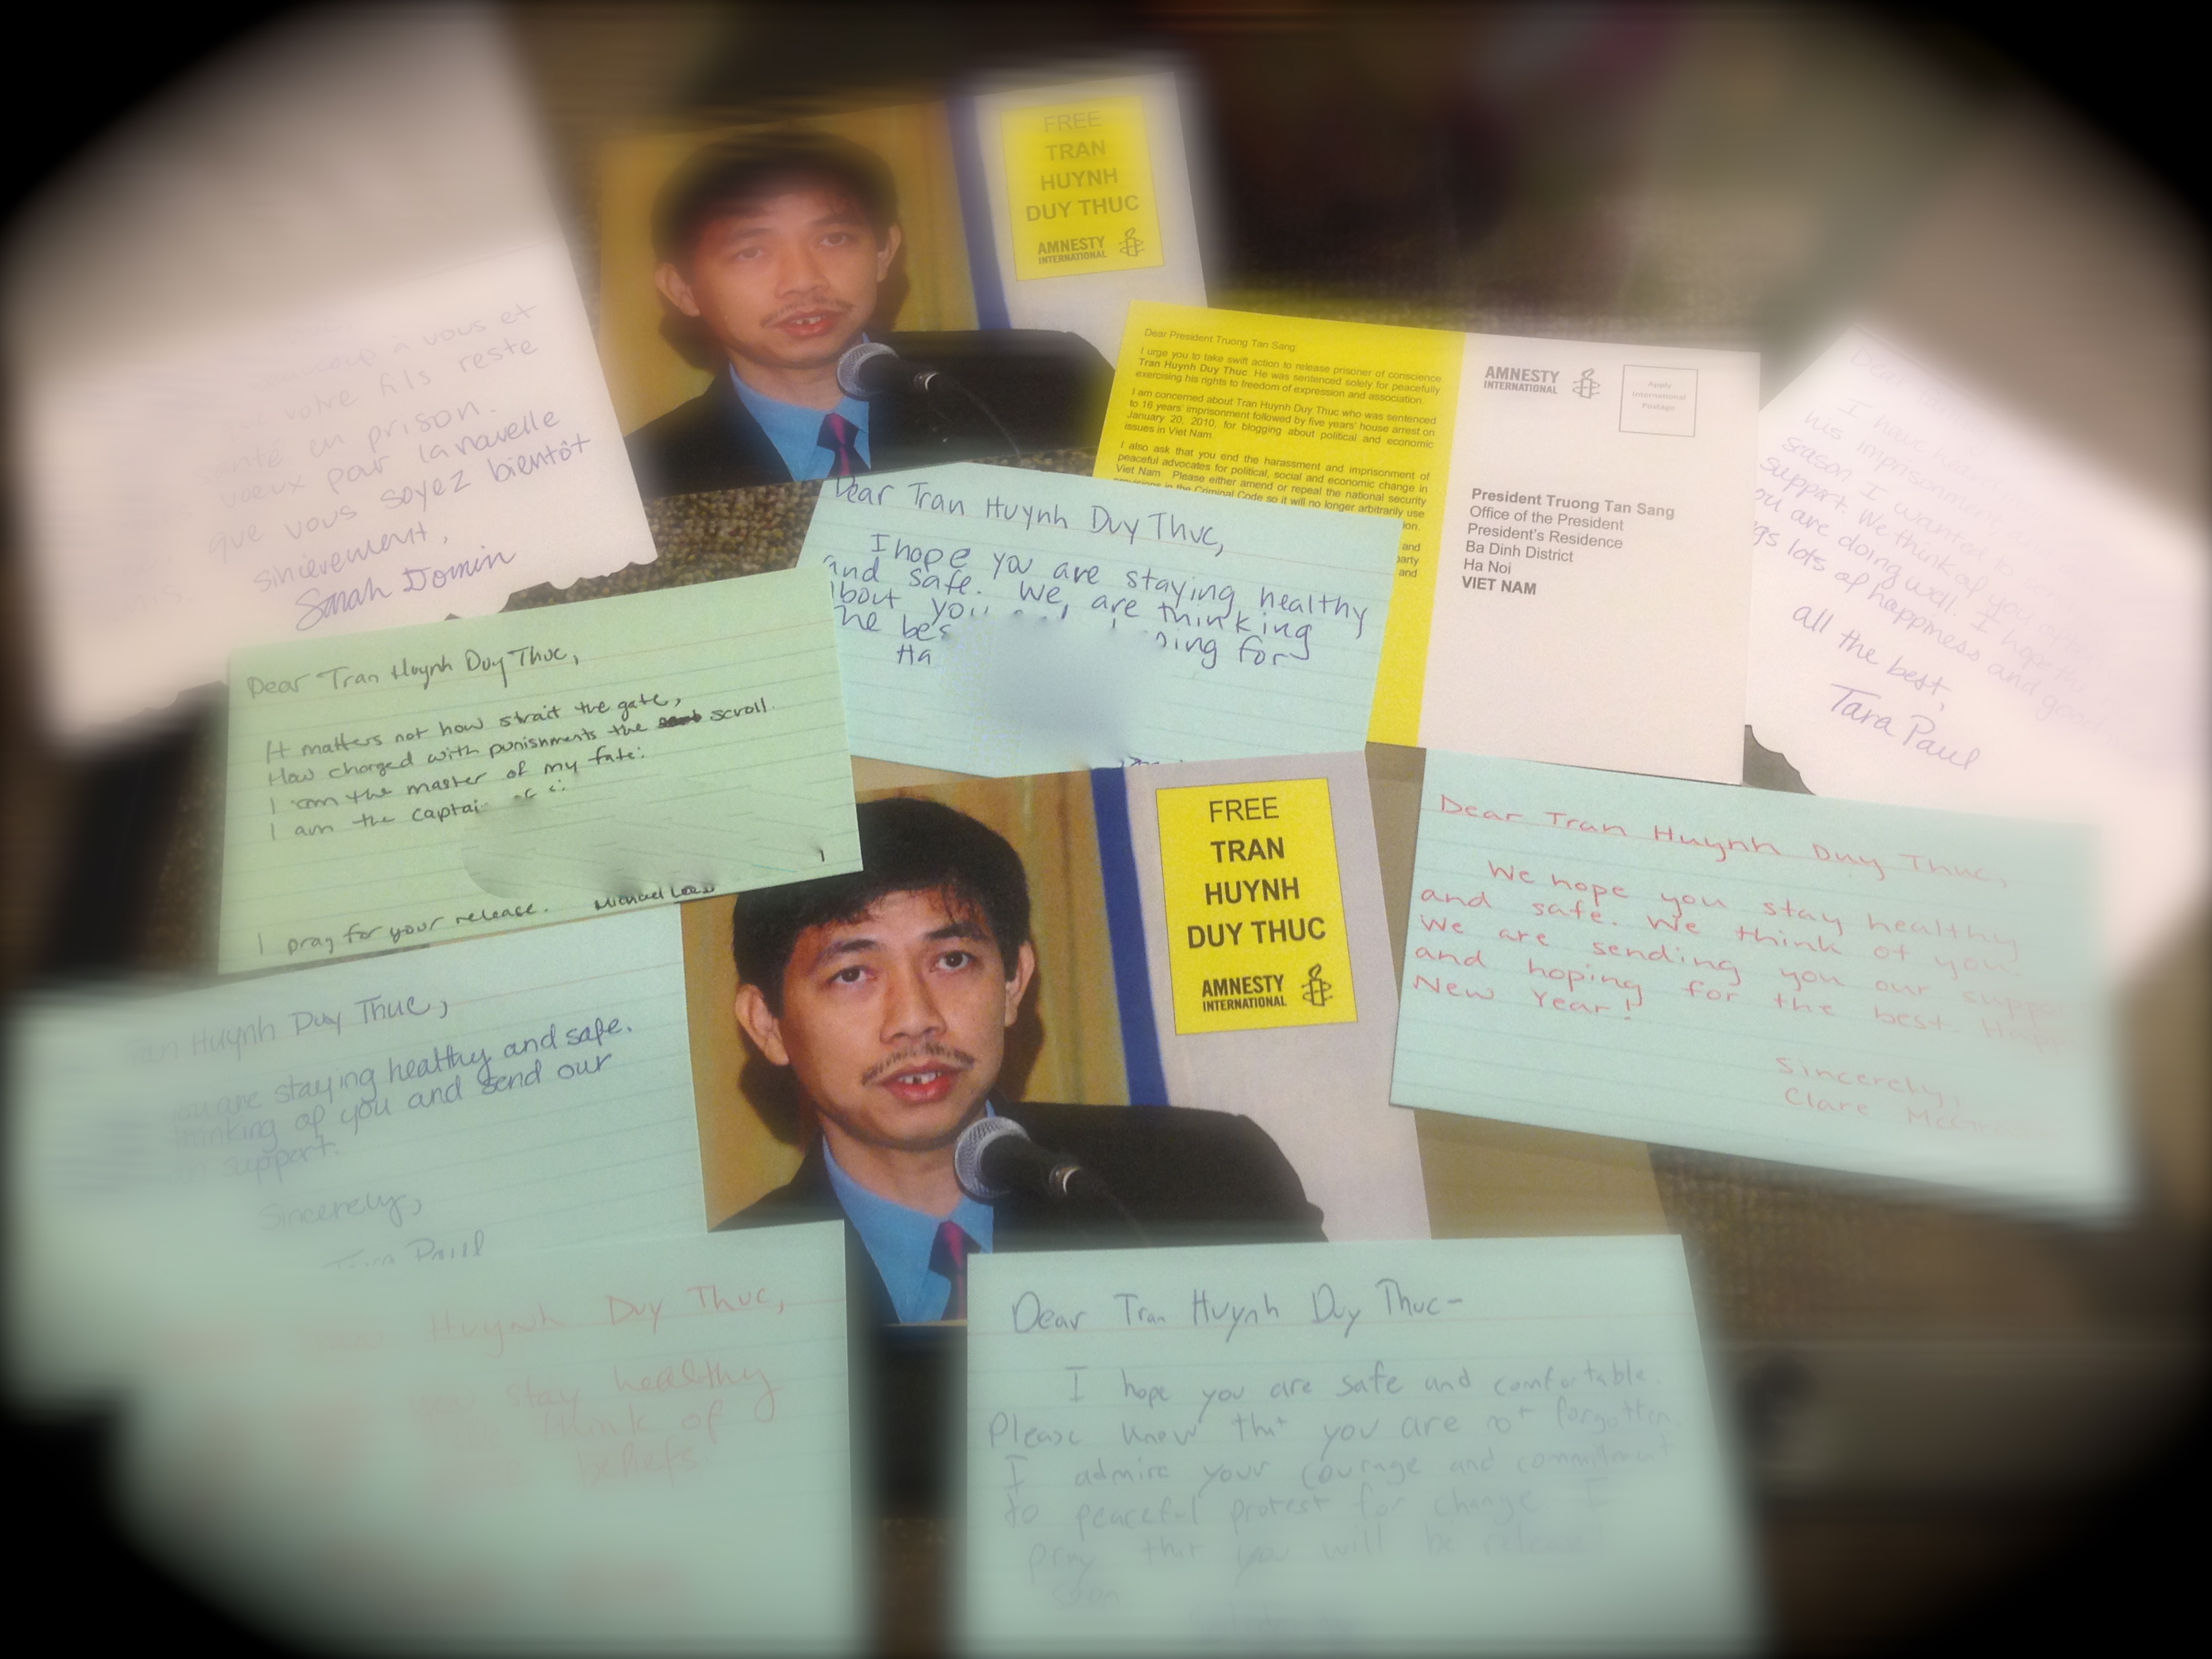 These are some of the cards sent on behalf of Thuc 